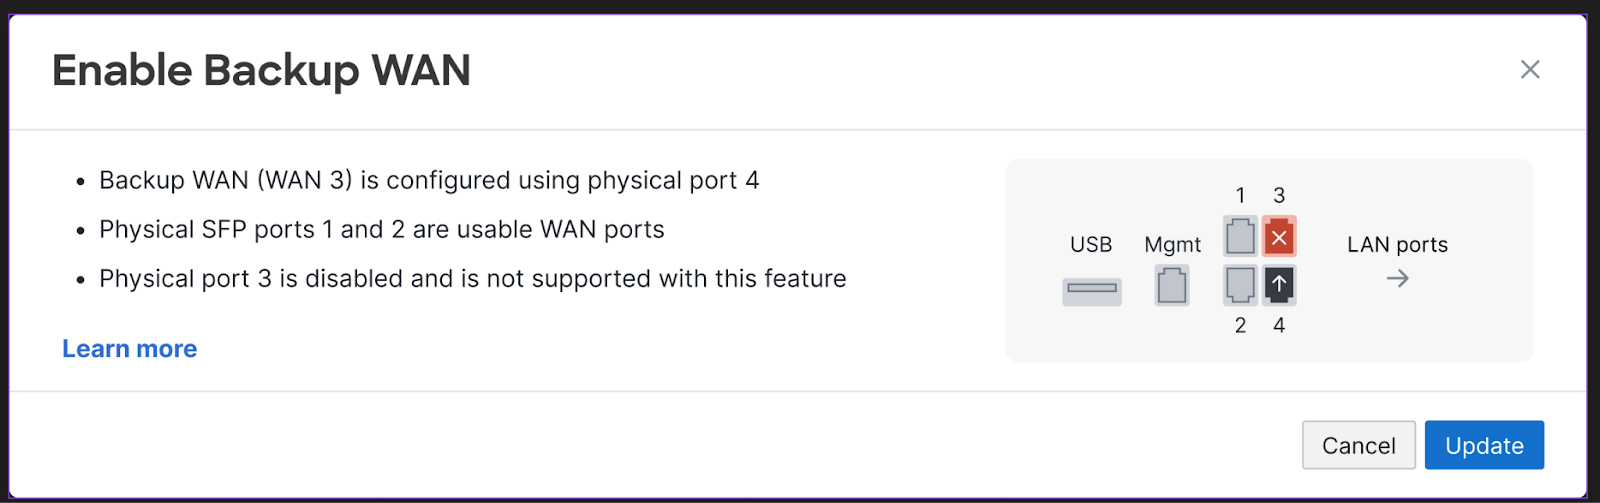 Enable backup WAN option in the Dashboard